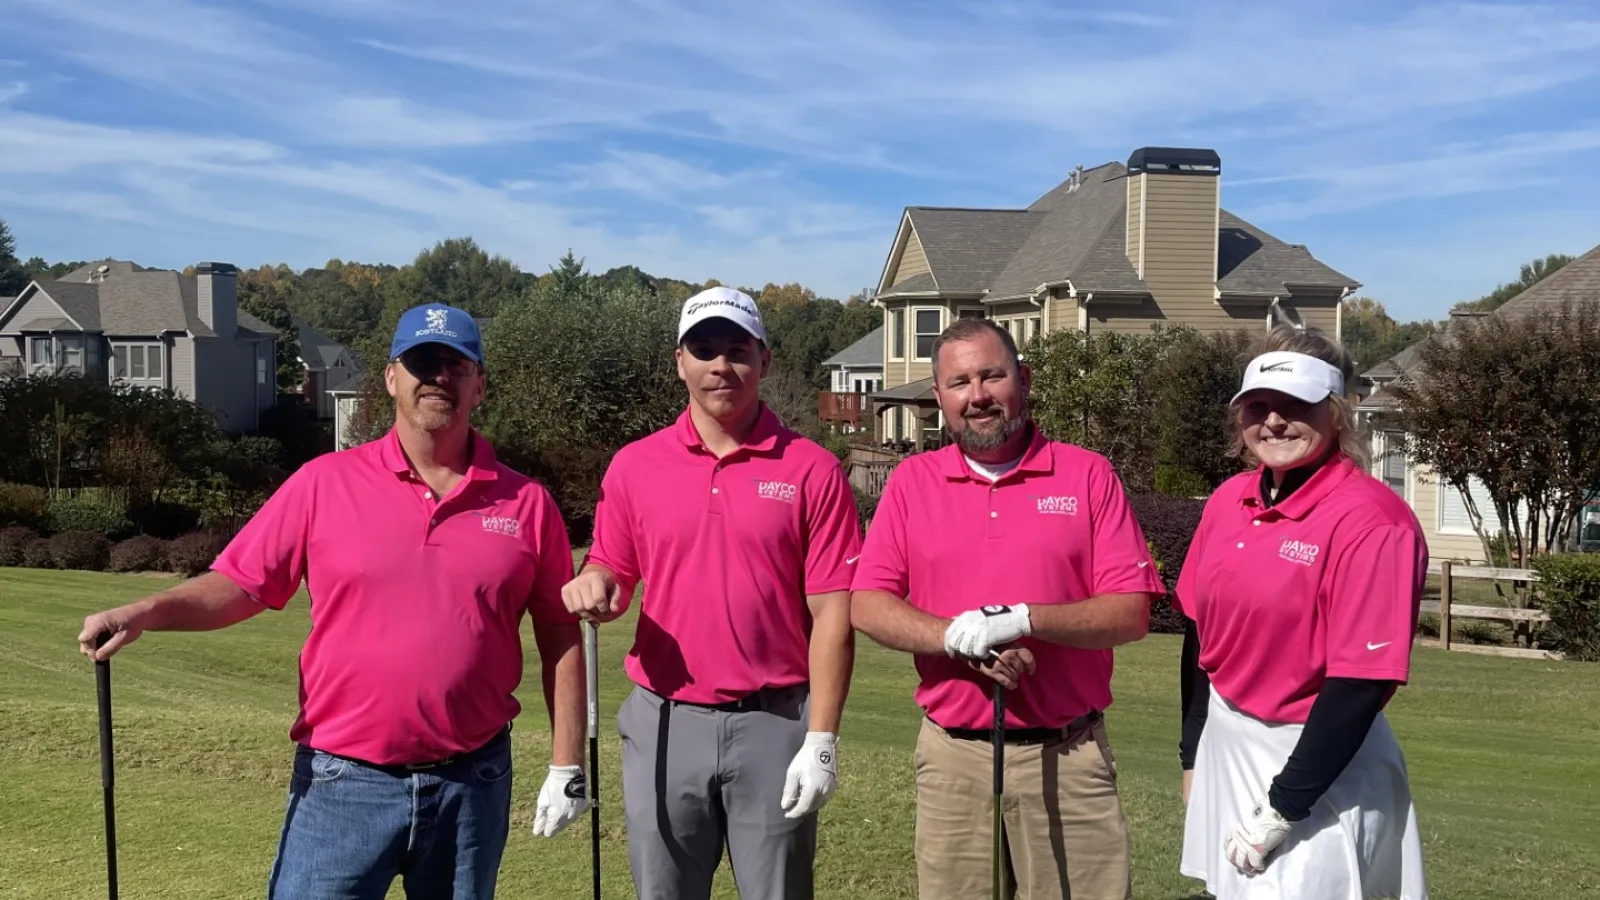 a group of people wearing pink shirts and holding golf clubs